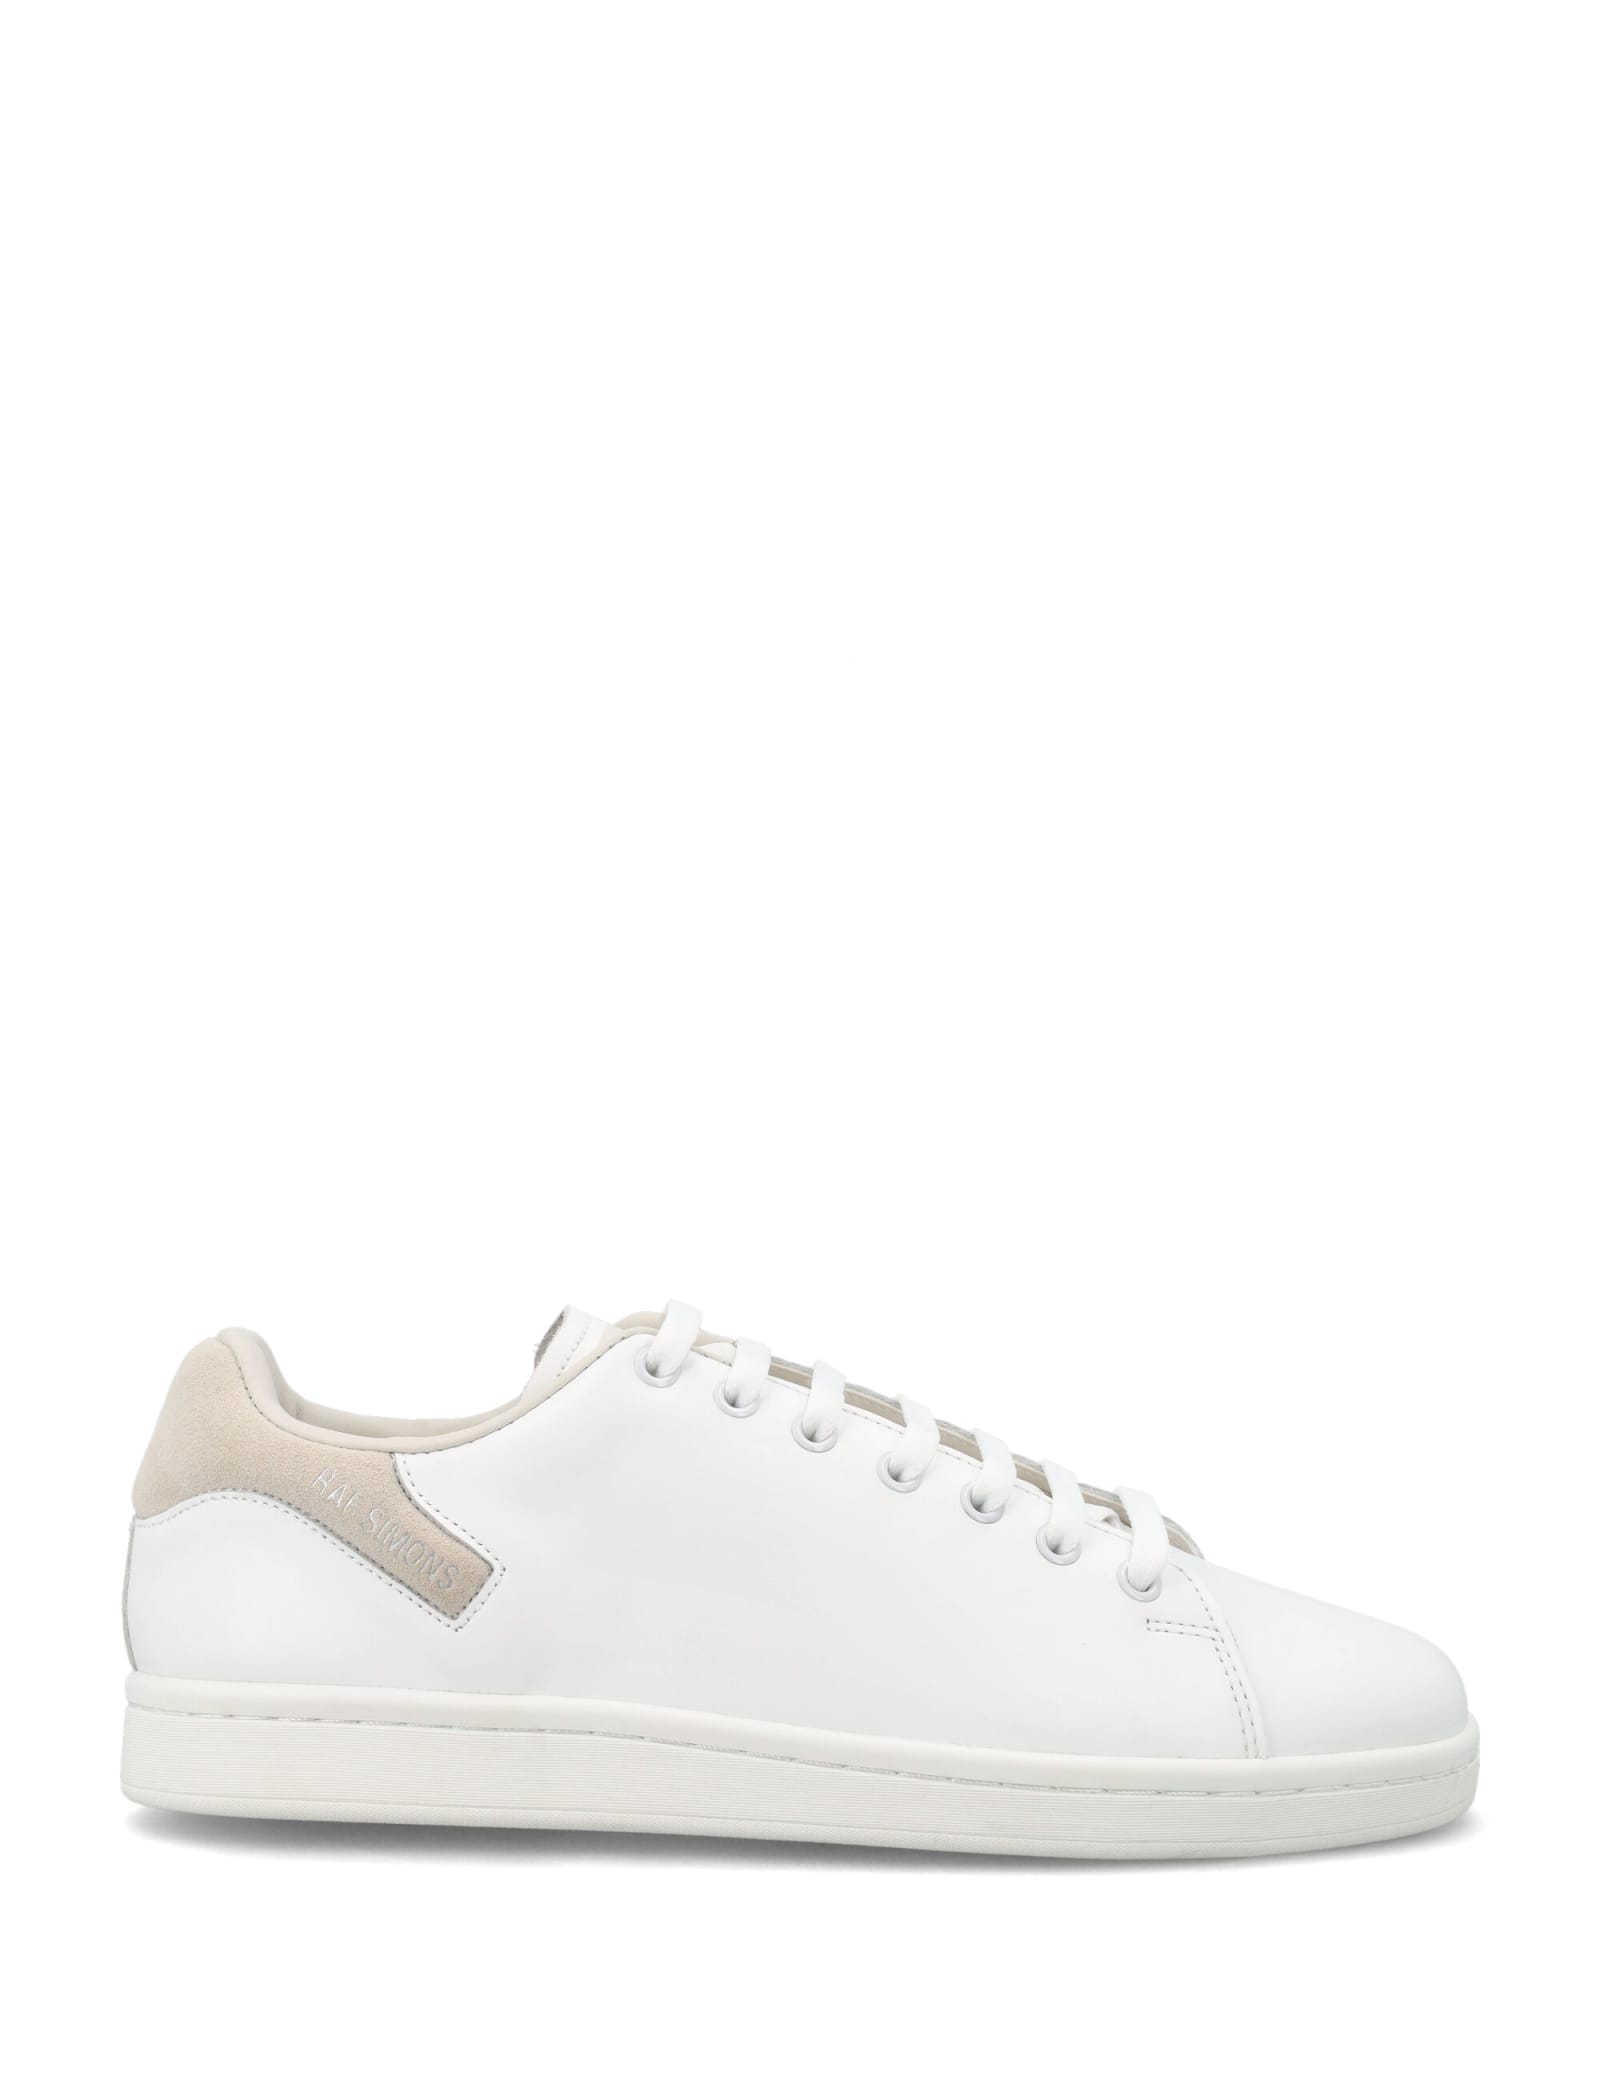 Raf Simons Orion Low-top Sneakers